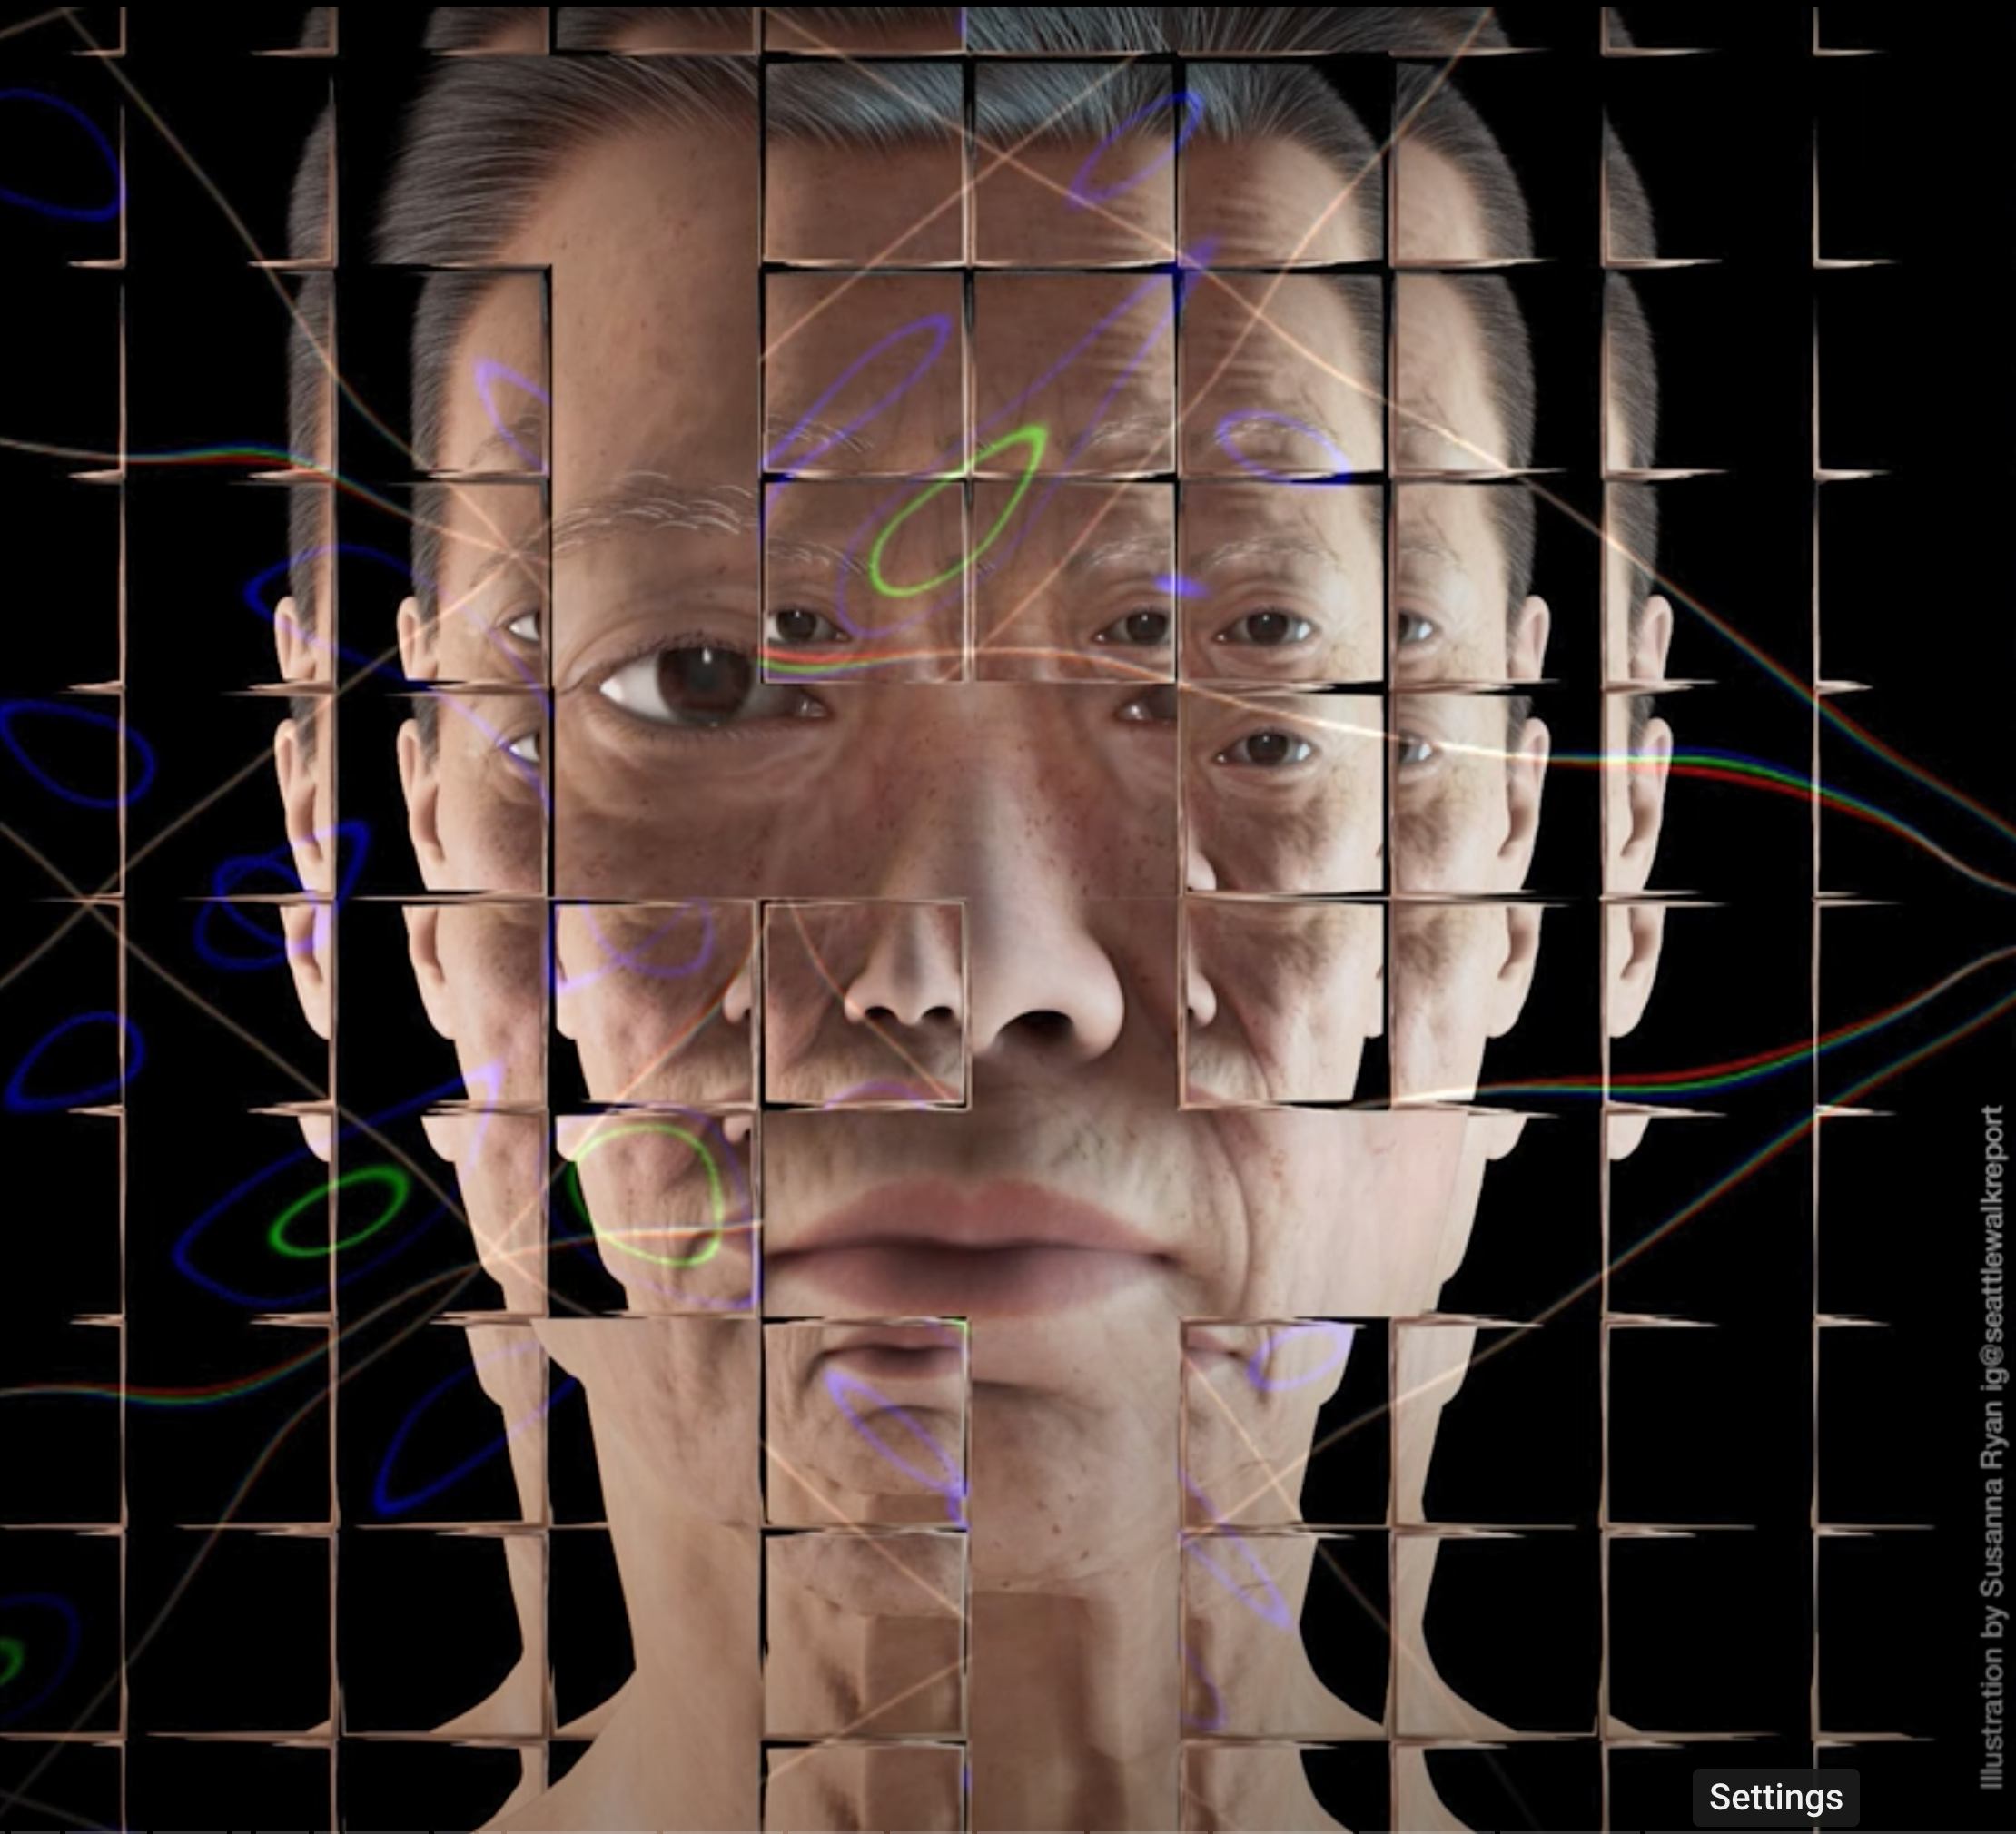 Digital illustration of a man's face in front of a black background. His face is overlaid with a grid that contains portions of the same image, for example his left ear is fractured into six smaller versions of the same ear, and below his mouth are several smaller mouths. On the right side, an artist credit reads, 'Illustration by Susanna Ryan.'